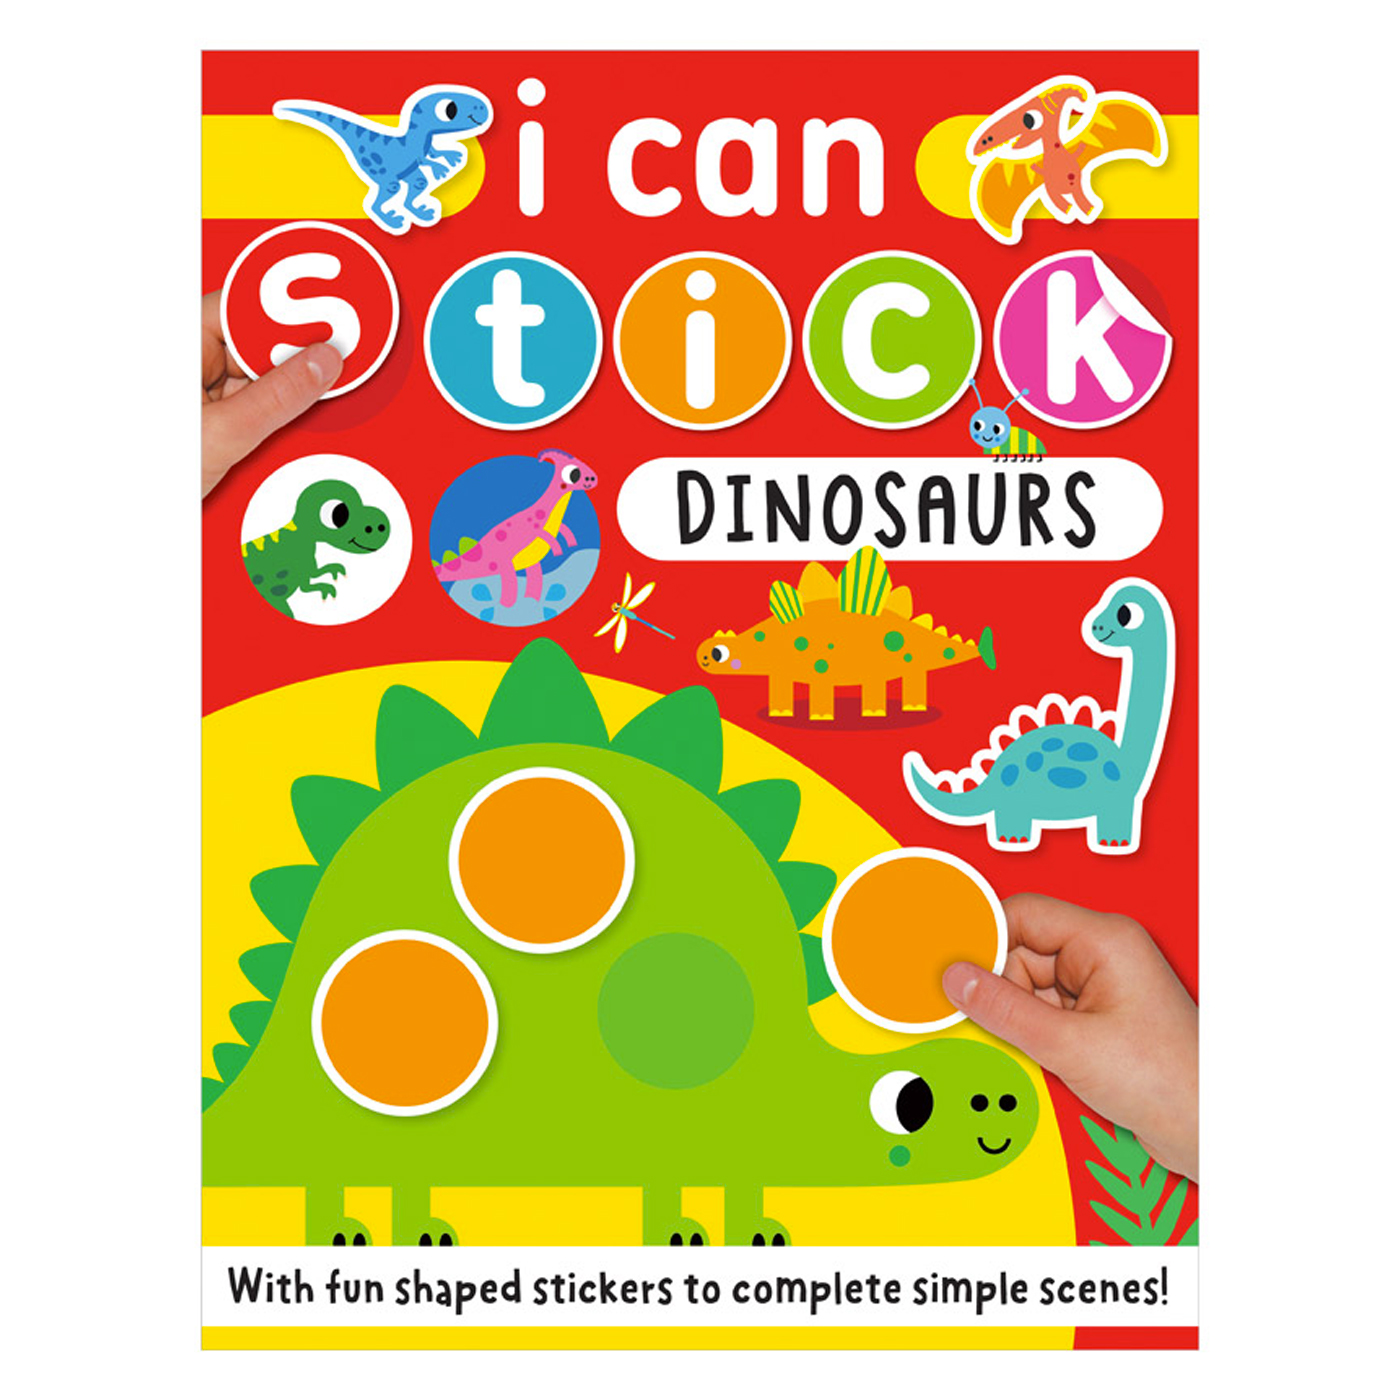  I Can Stick Dinosaurs